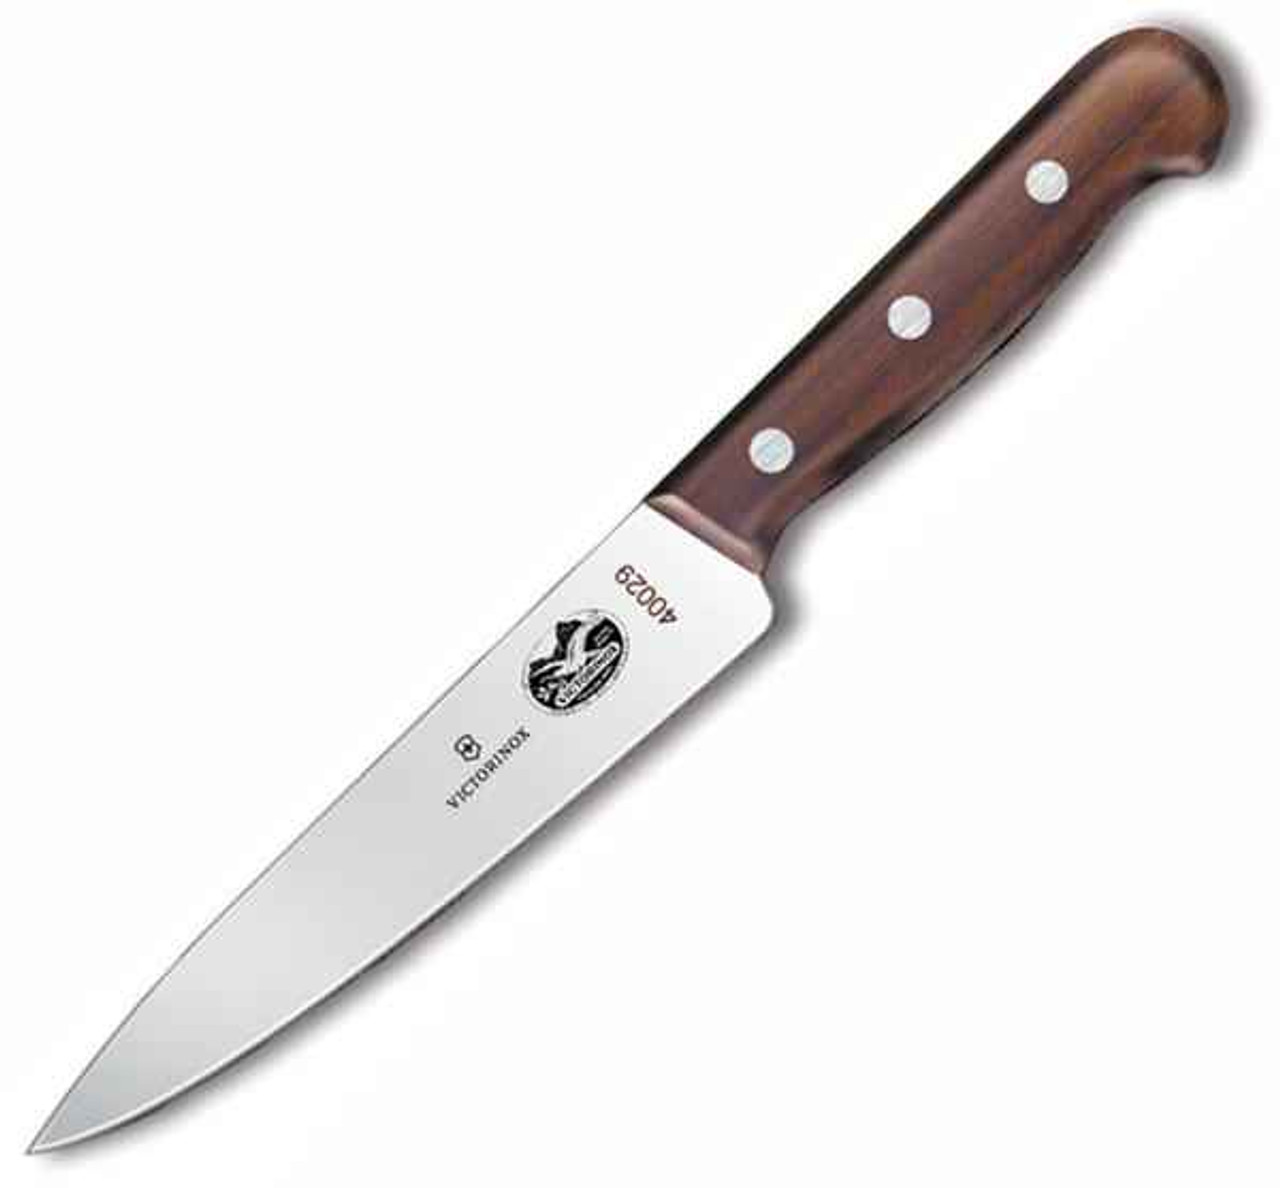 Forschner 6 in. Chef's Knife, Rosewood Handle